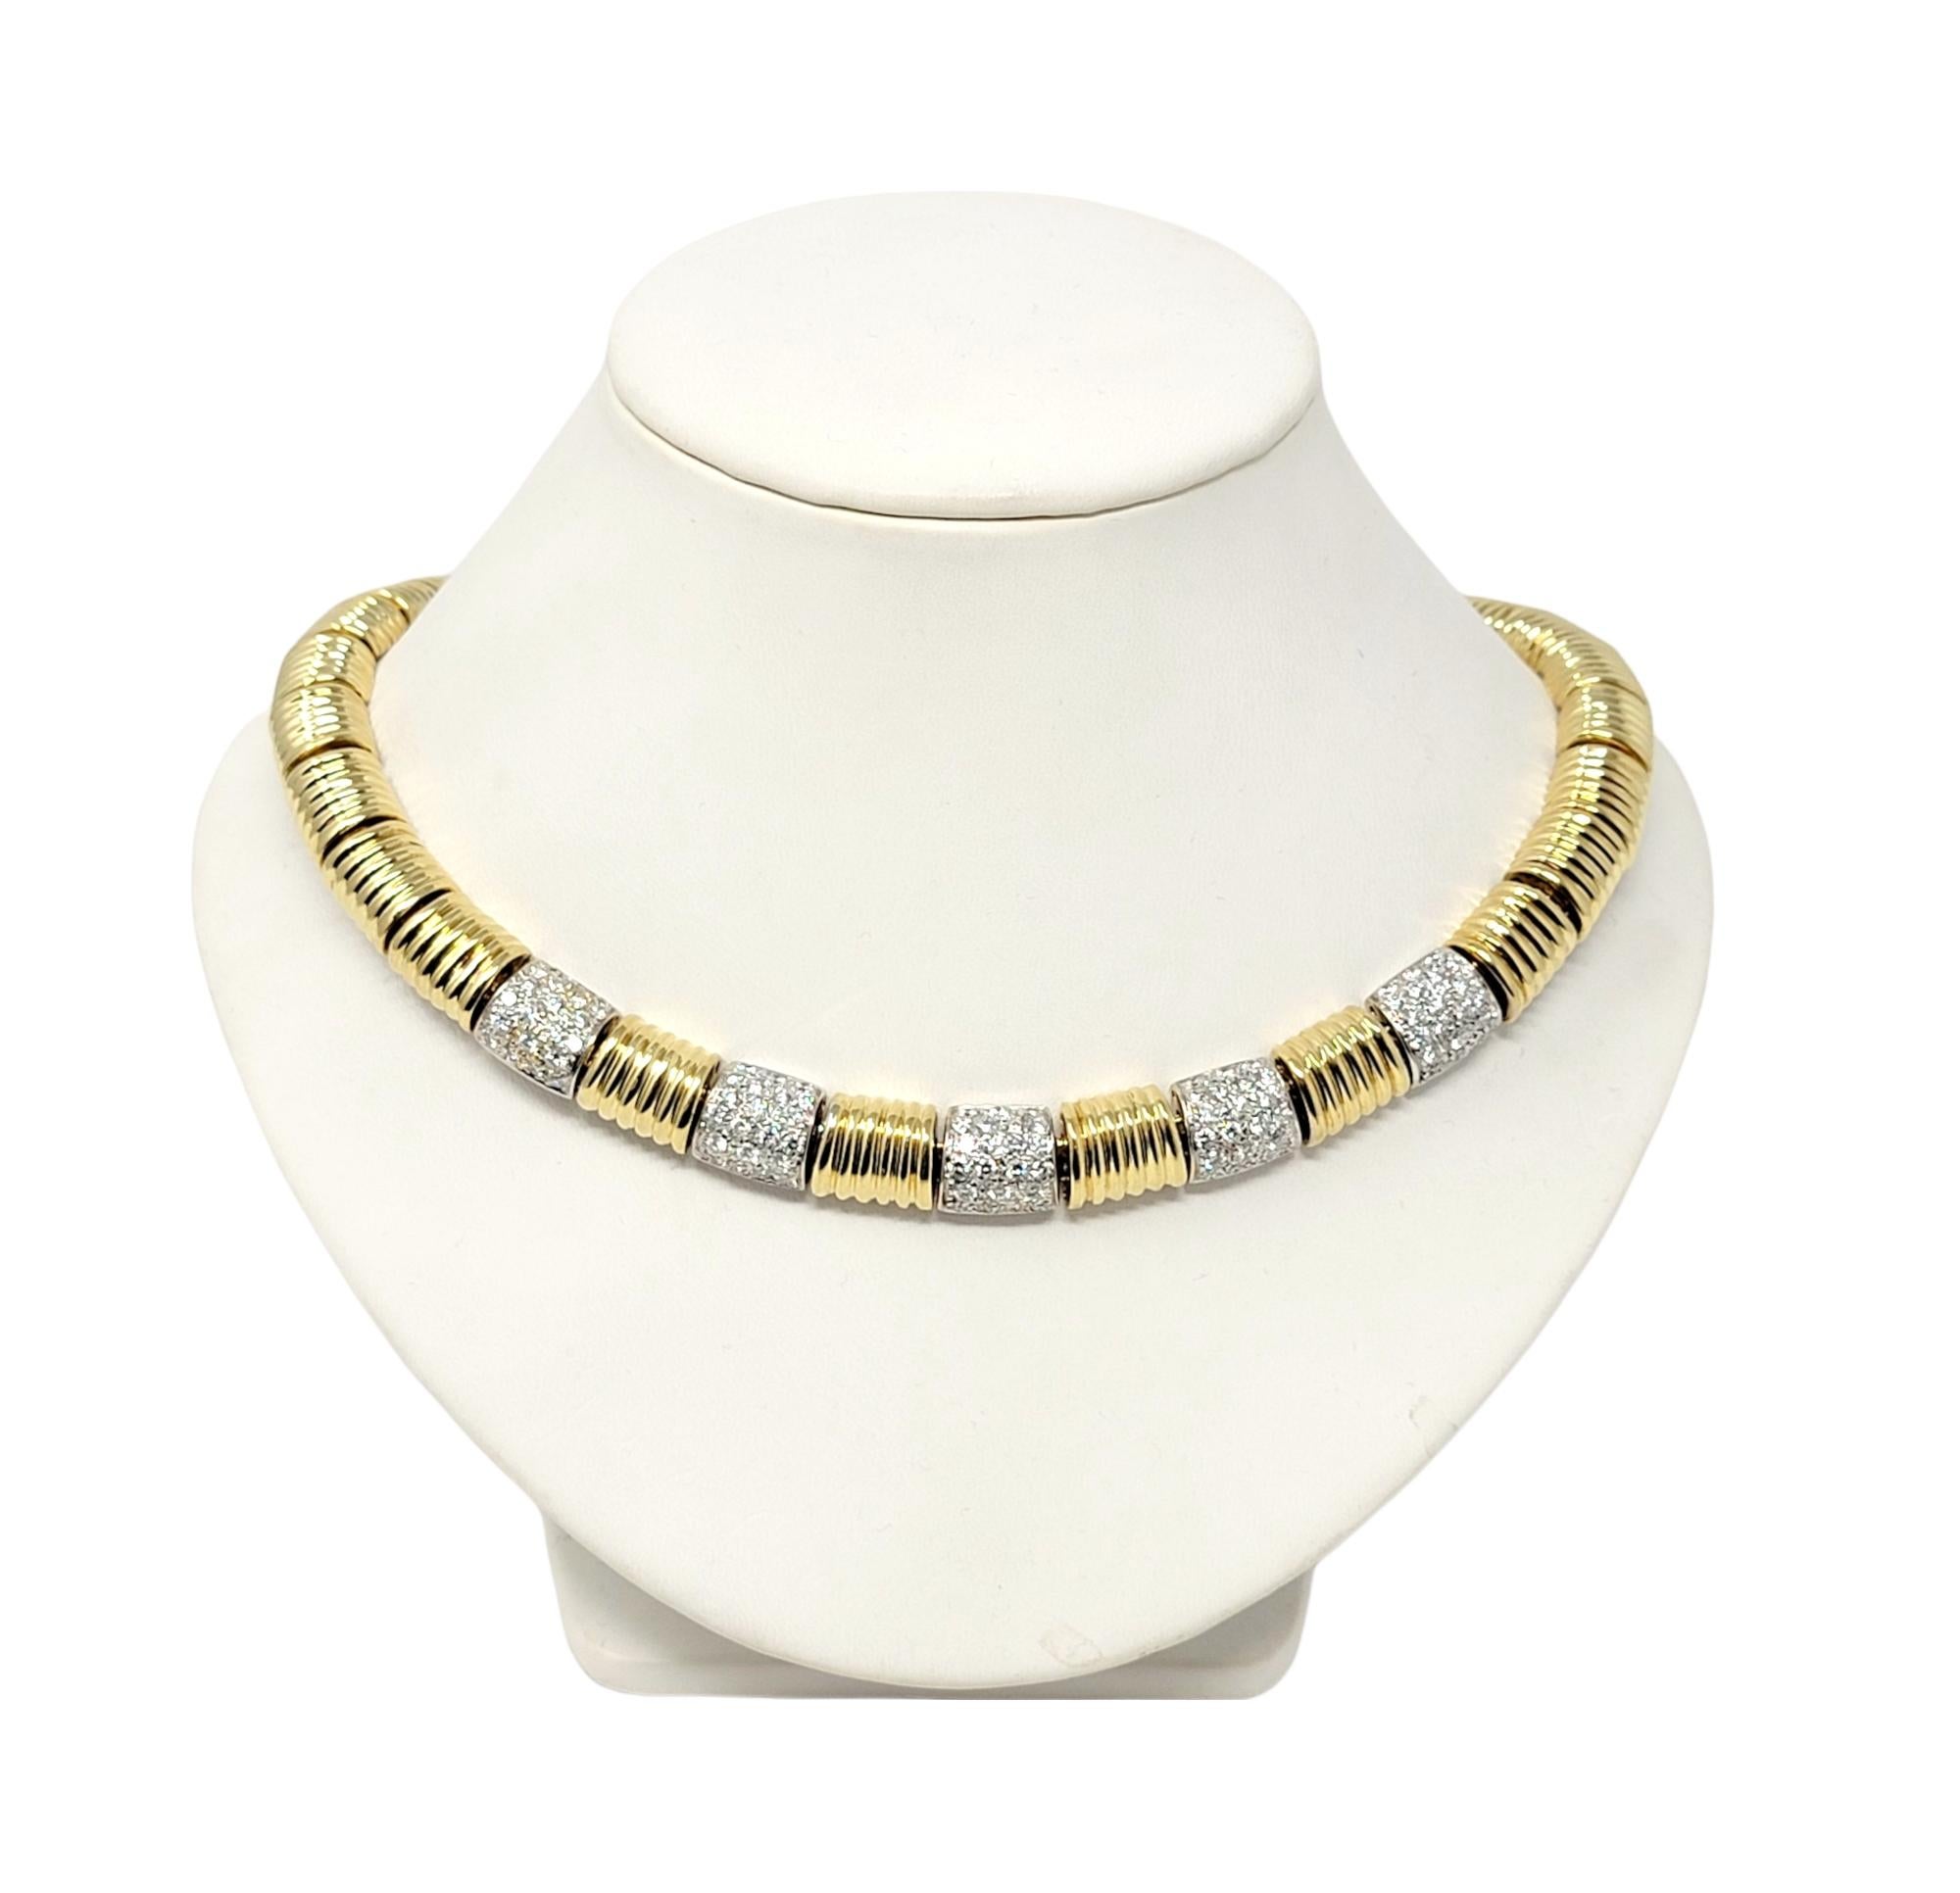 18 Karat Yellow and White Gold Ridged Link Choker Necklace with Pave Diamonds In Good Condition For Sale In Scottsdale, AZ